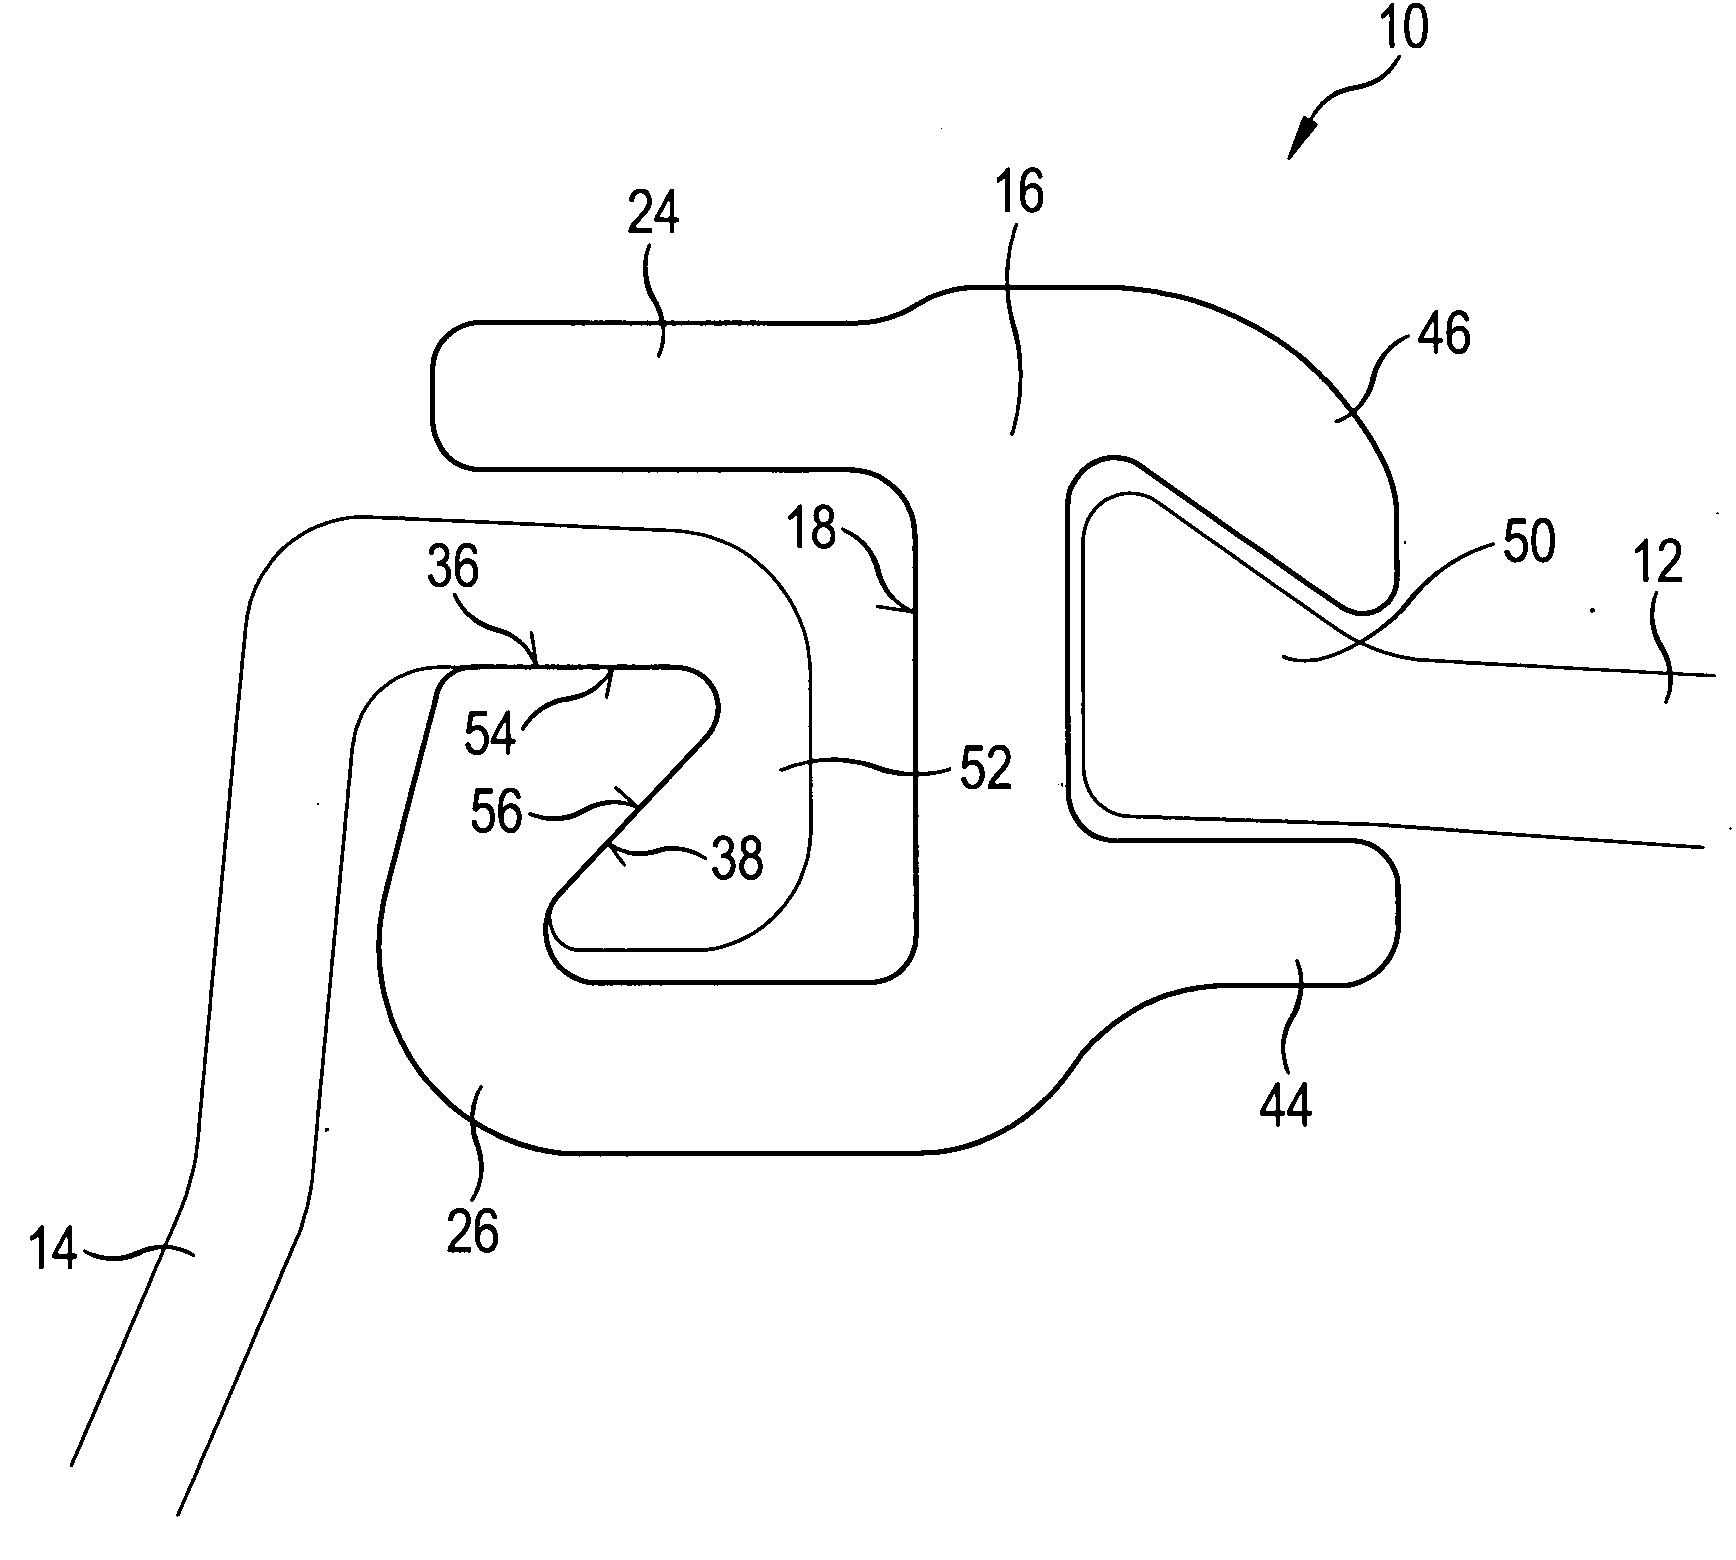 Connection element for connecting sheet piles to carrier elements as well as a combination sheet pile wall with such connection elements